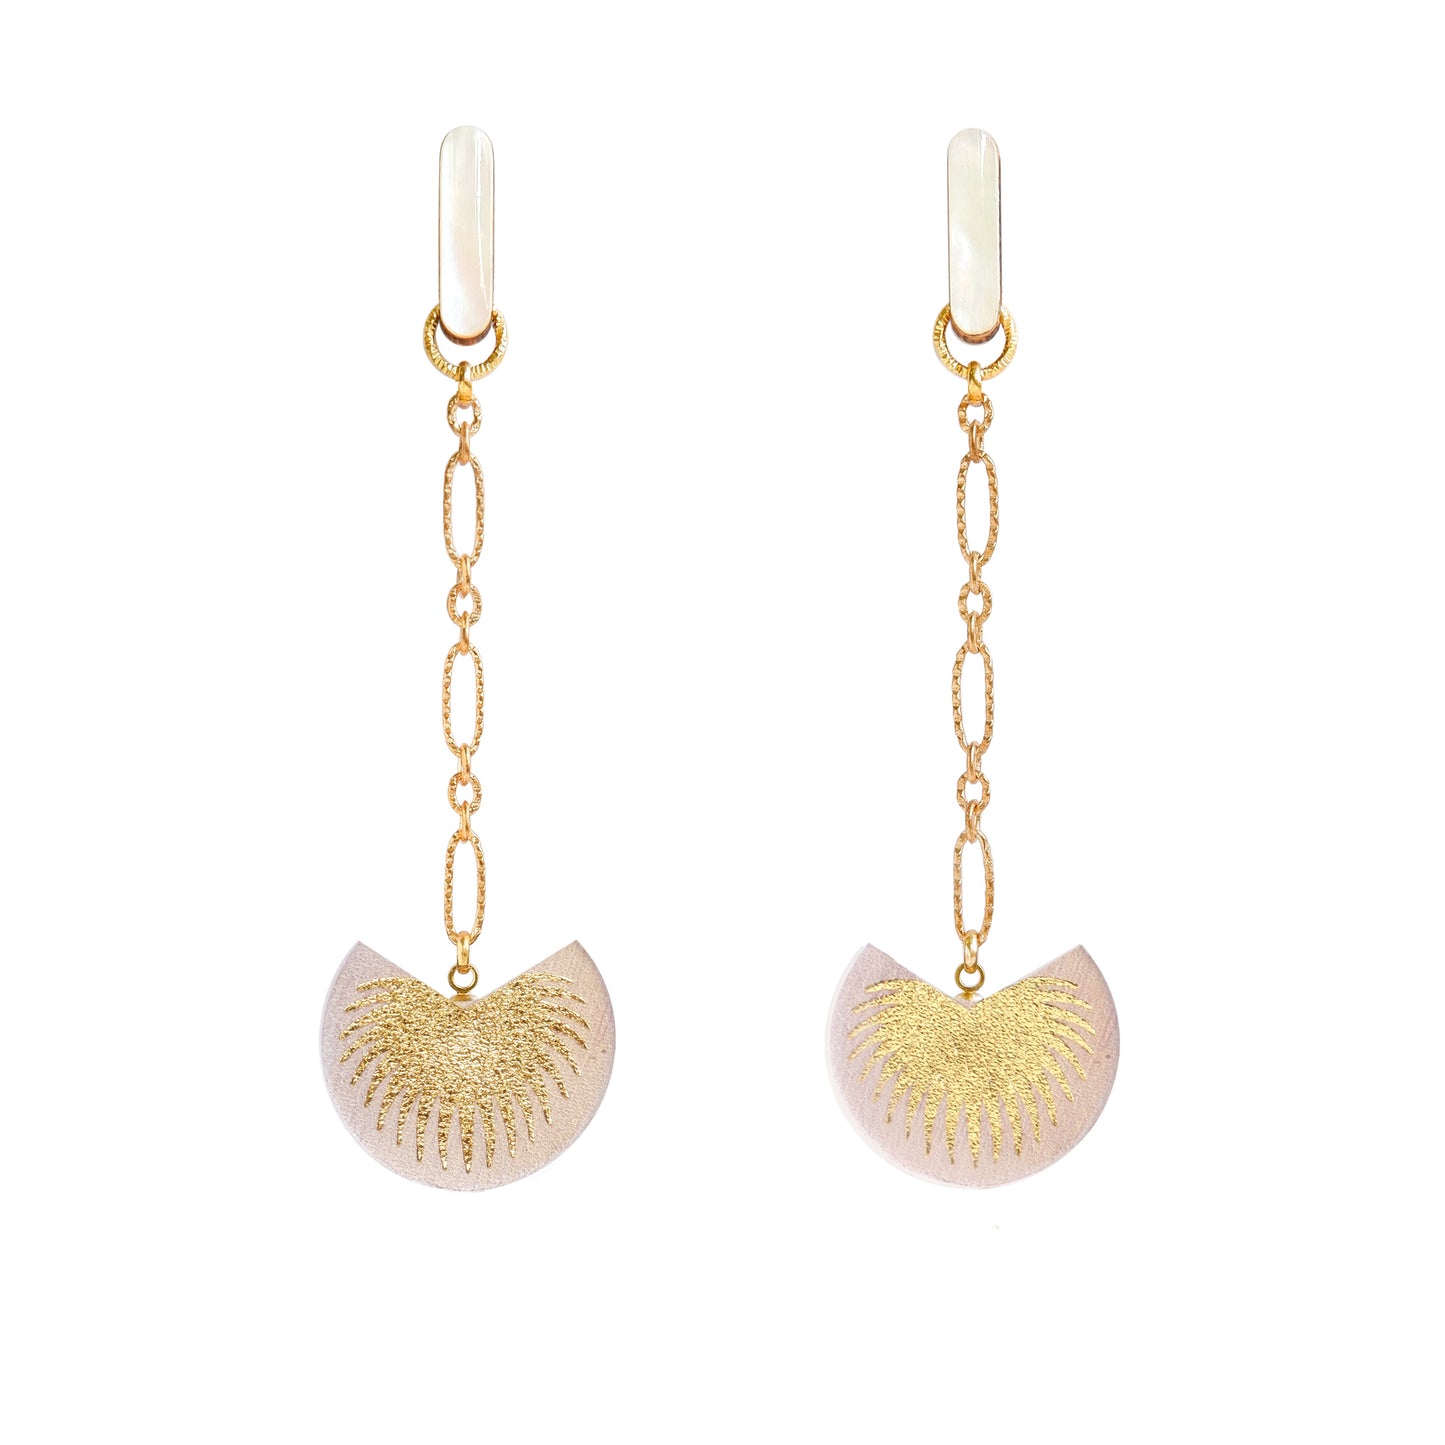 palm tree drop earrings. lilac leather medallions with gold palm print, on longl-link chain from long mother of pearl studs